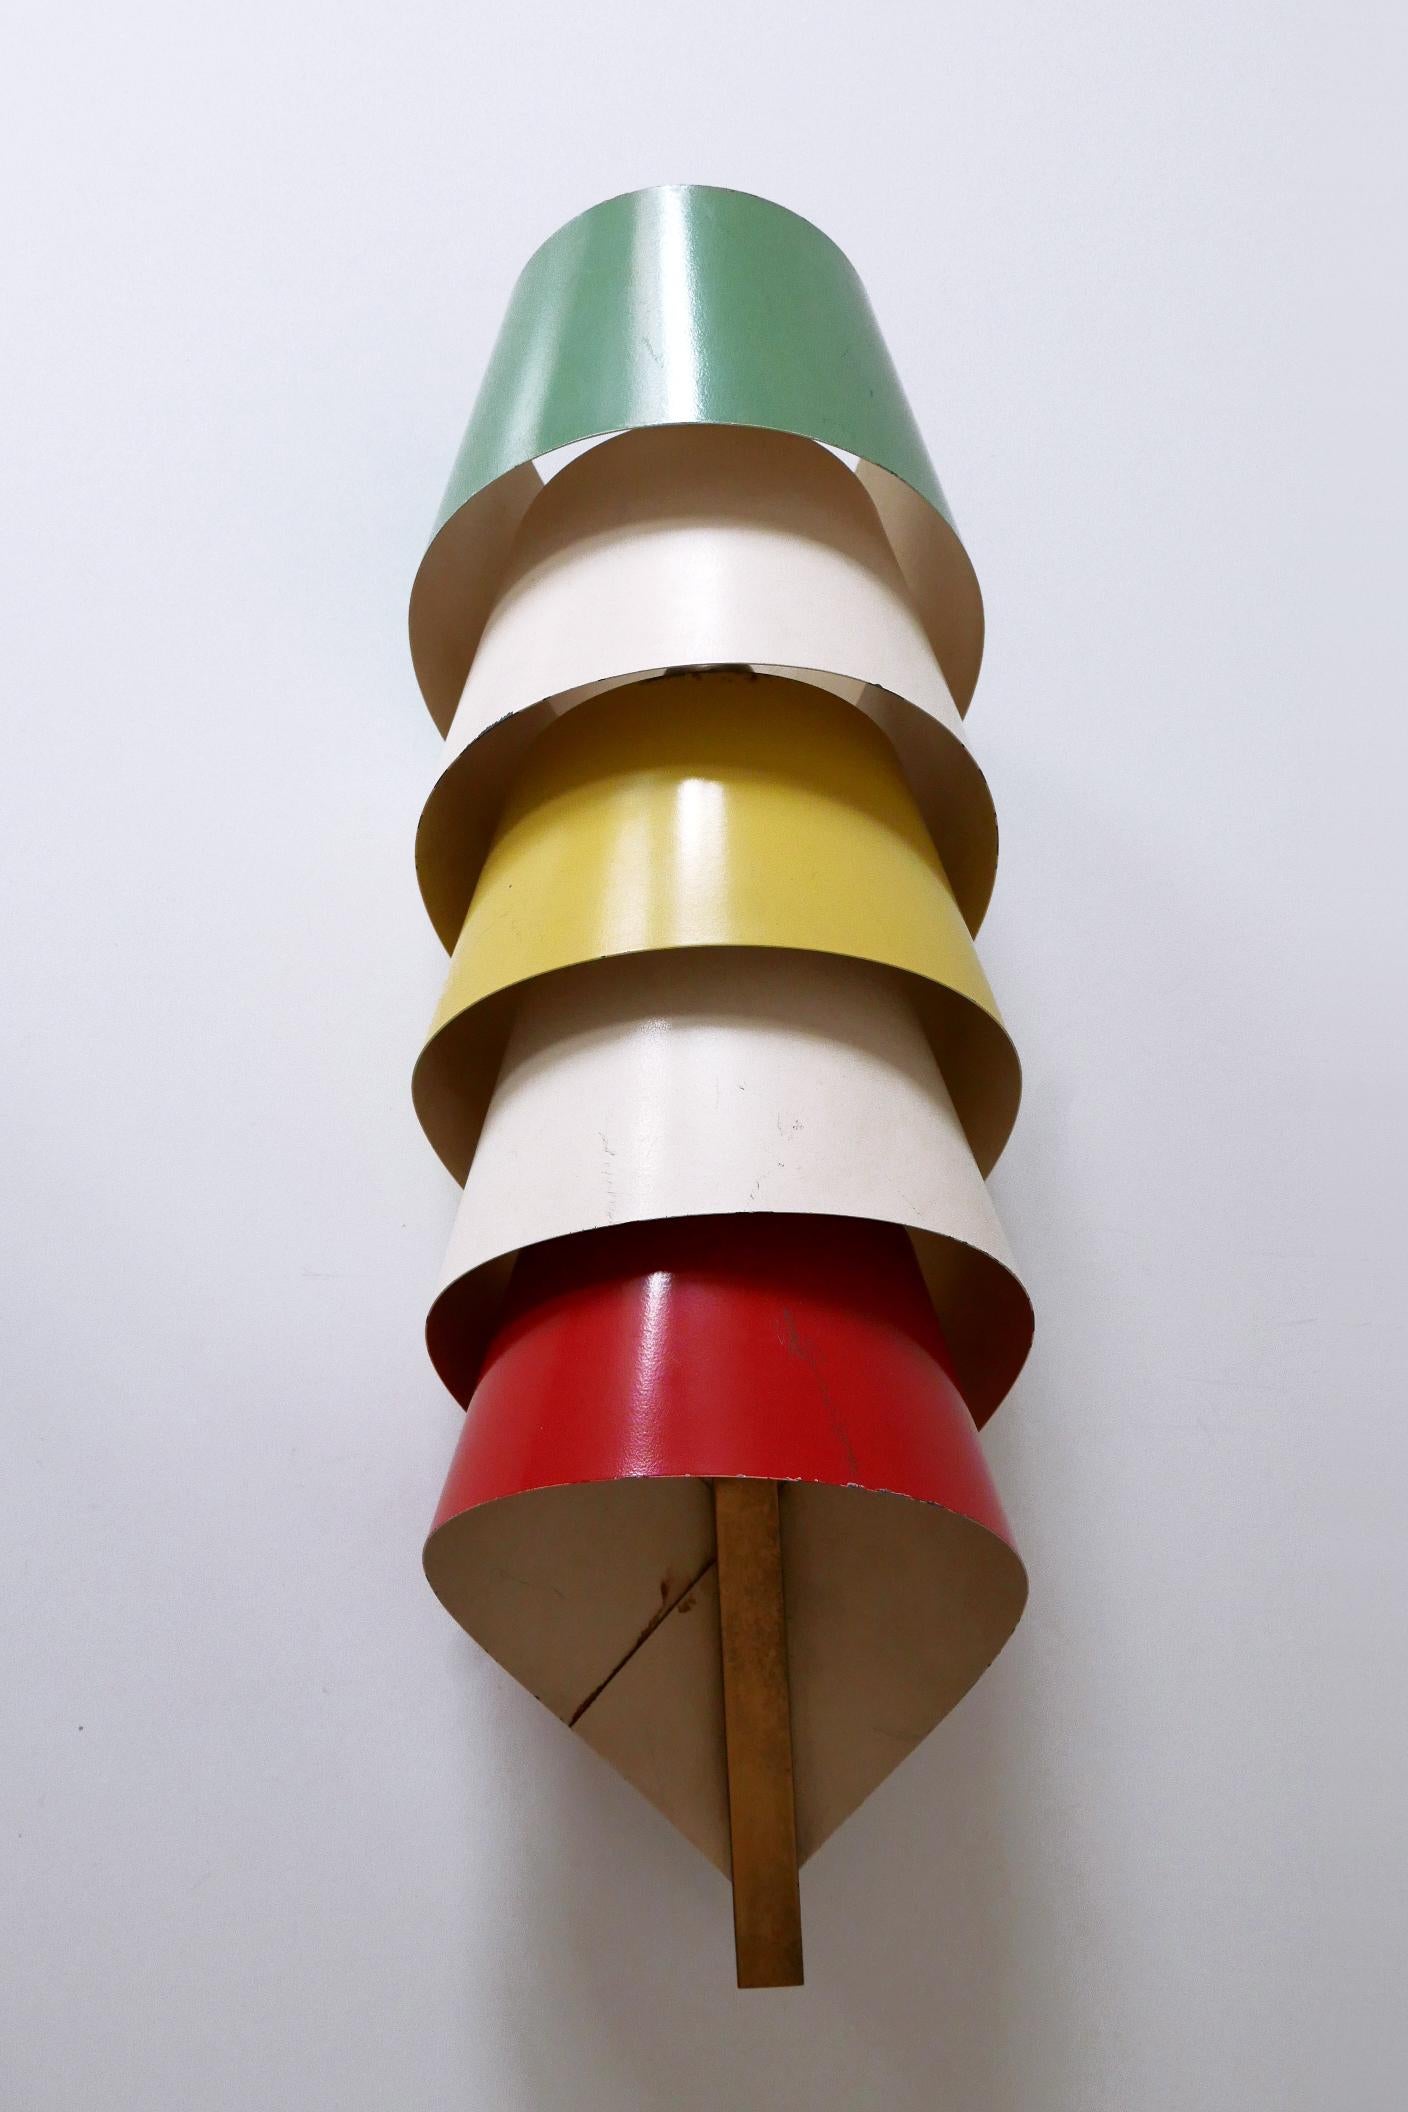 Rare & Decorative Mid-Century Modern Sconce or Wall Lamp Scandinavia 1950s For Sale 1